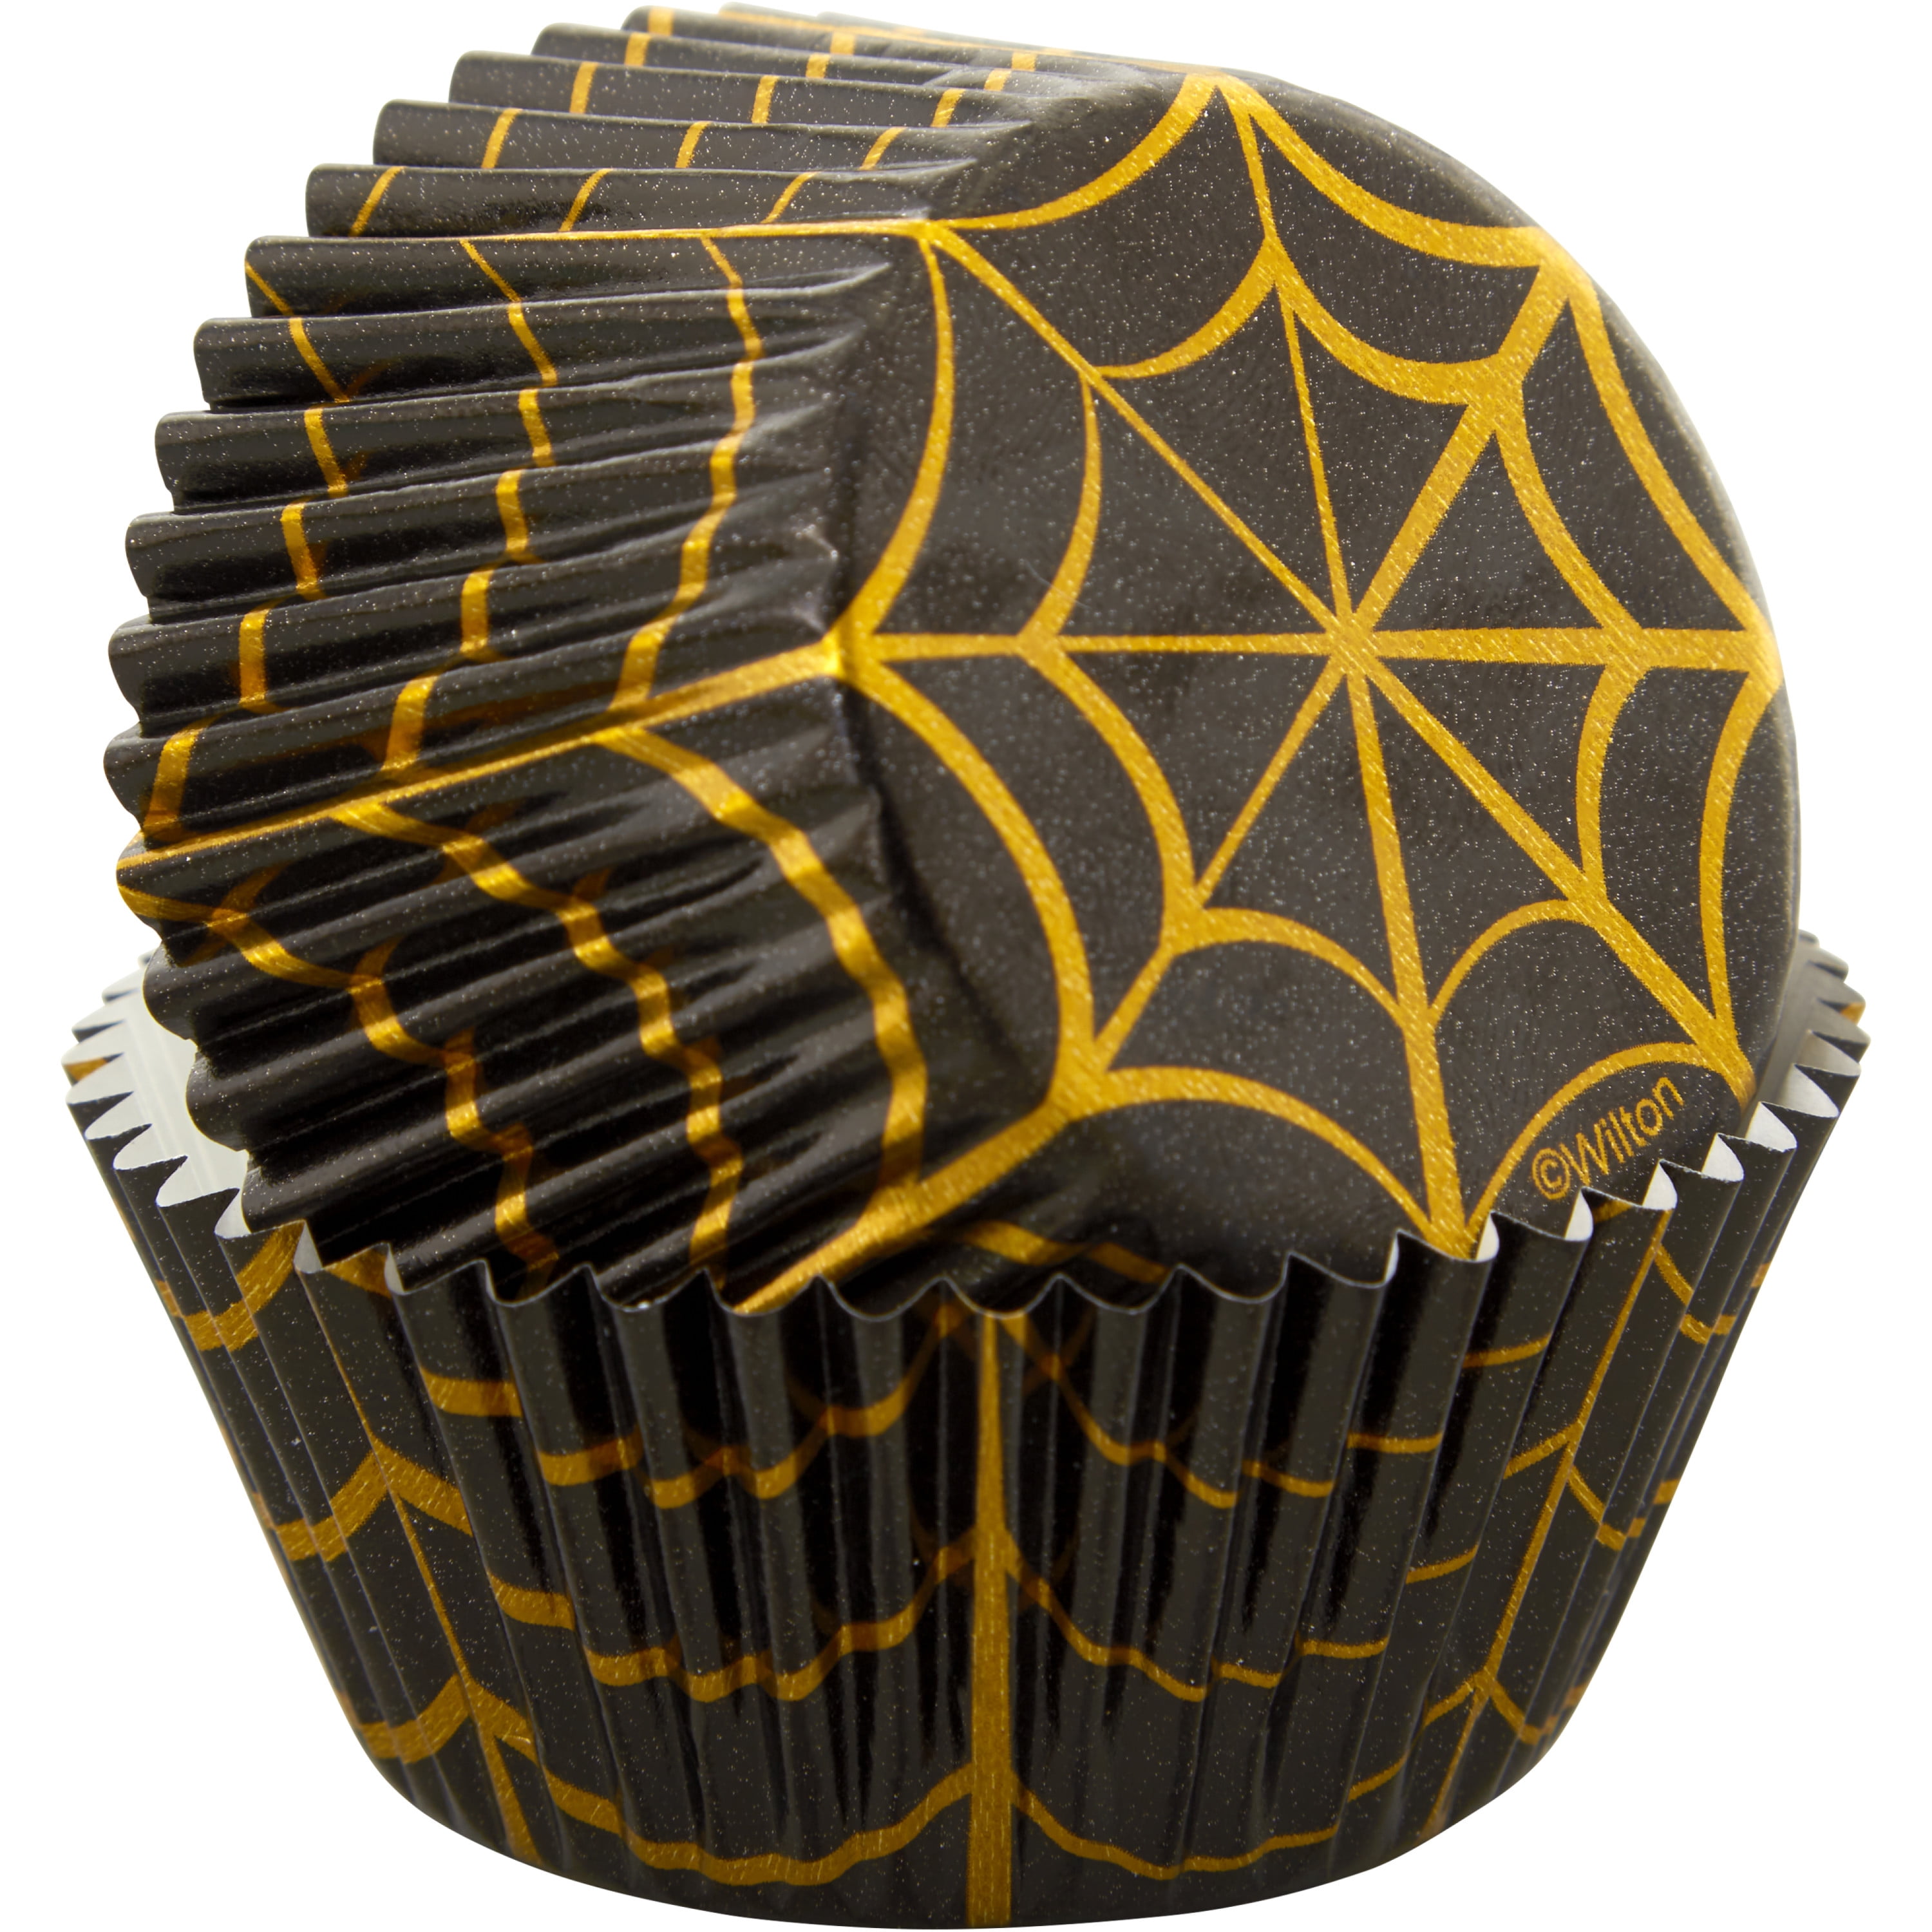 200-Count Gifbera Silver Foil Cupcake Liners Halloween, Standard